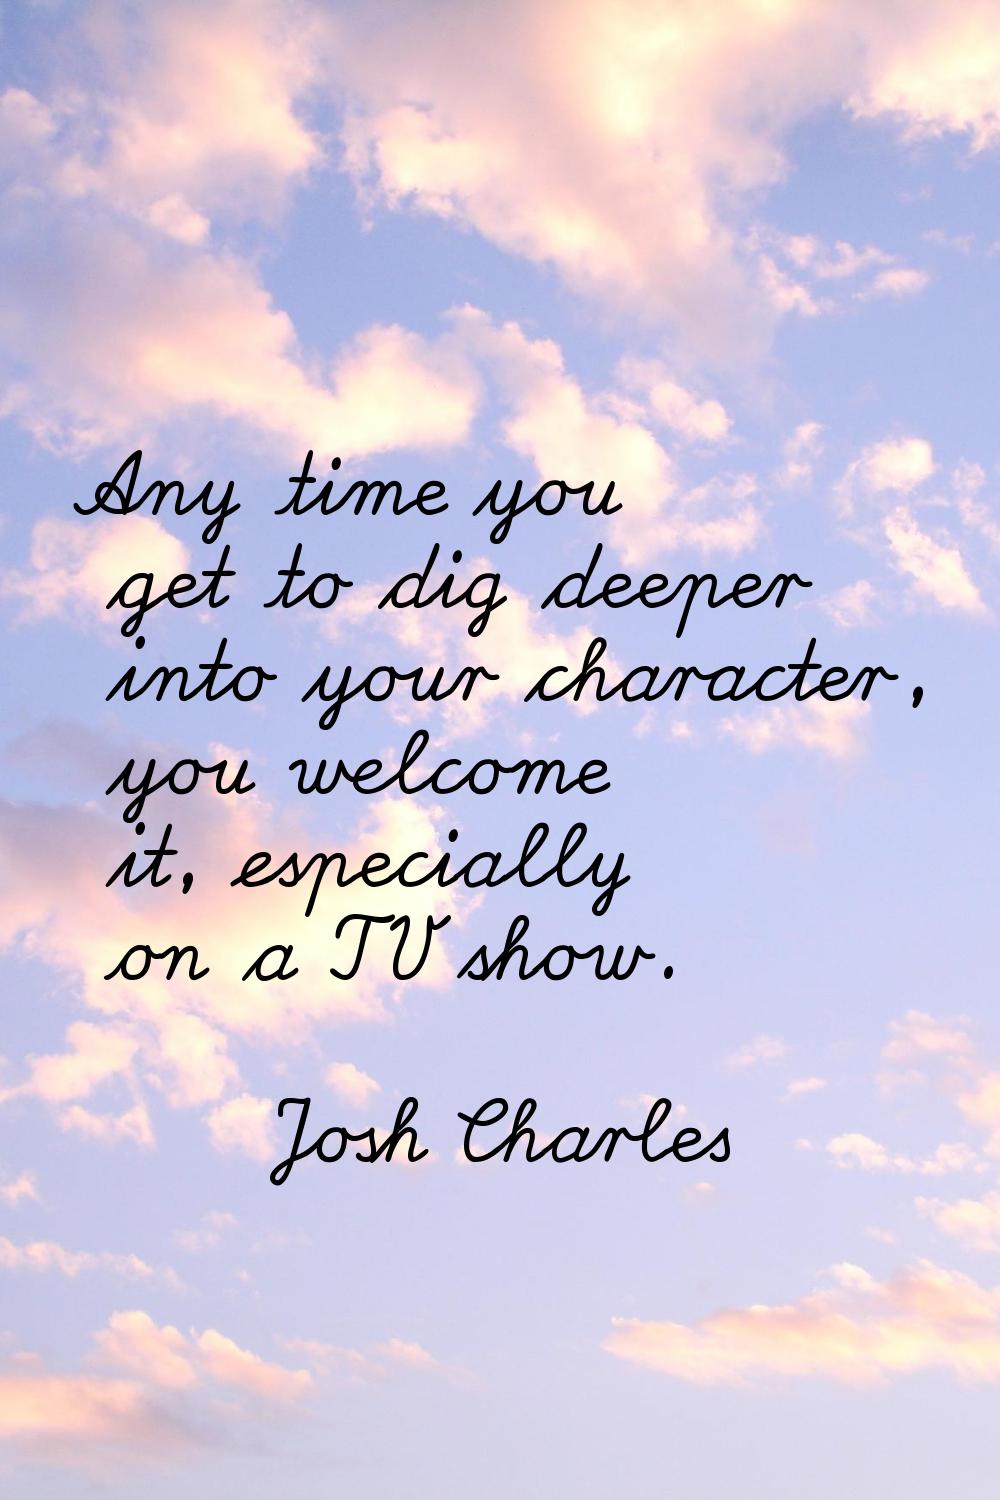 Any time you get to dig deeper into your character, you welcome it, especially on a TV show.